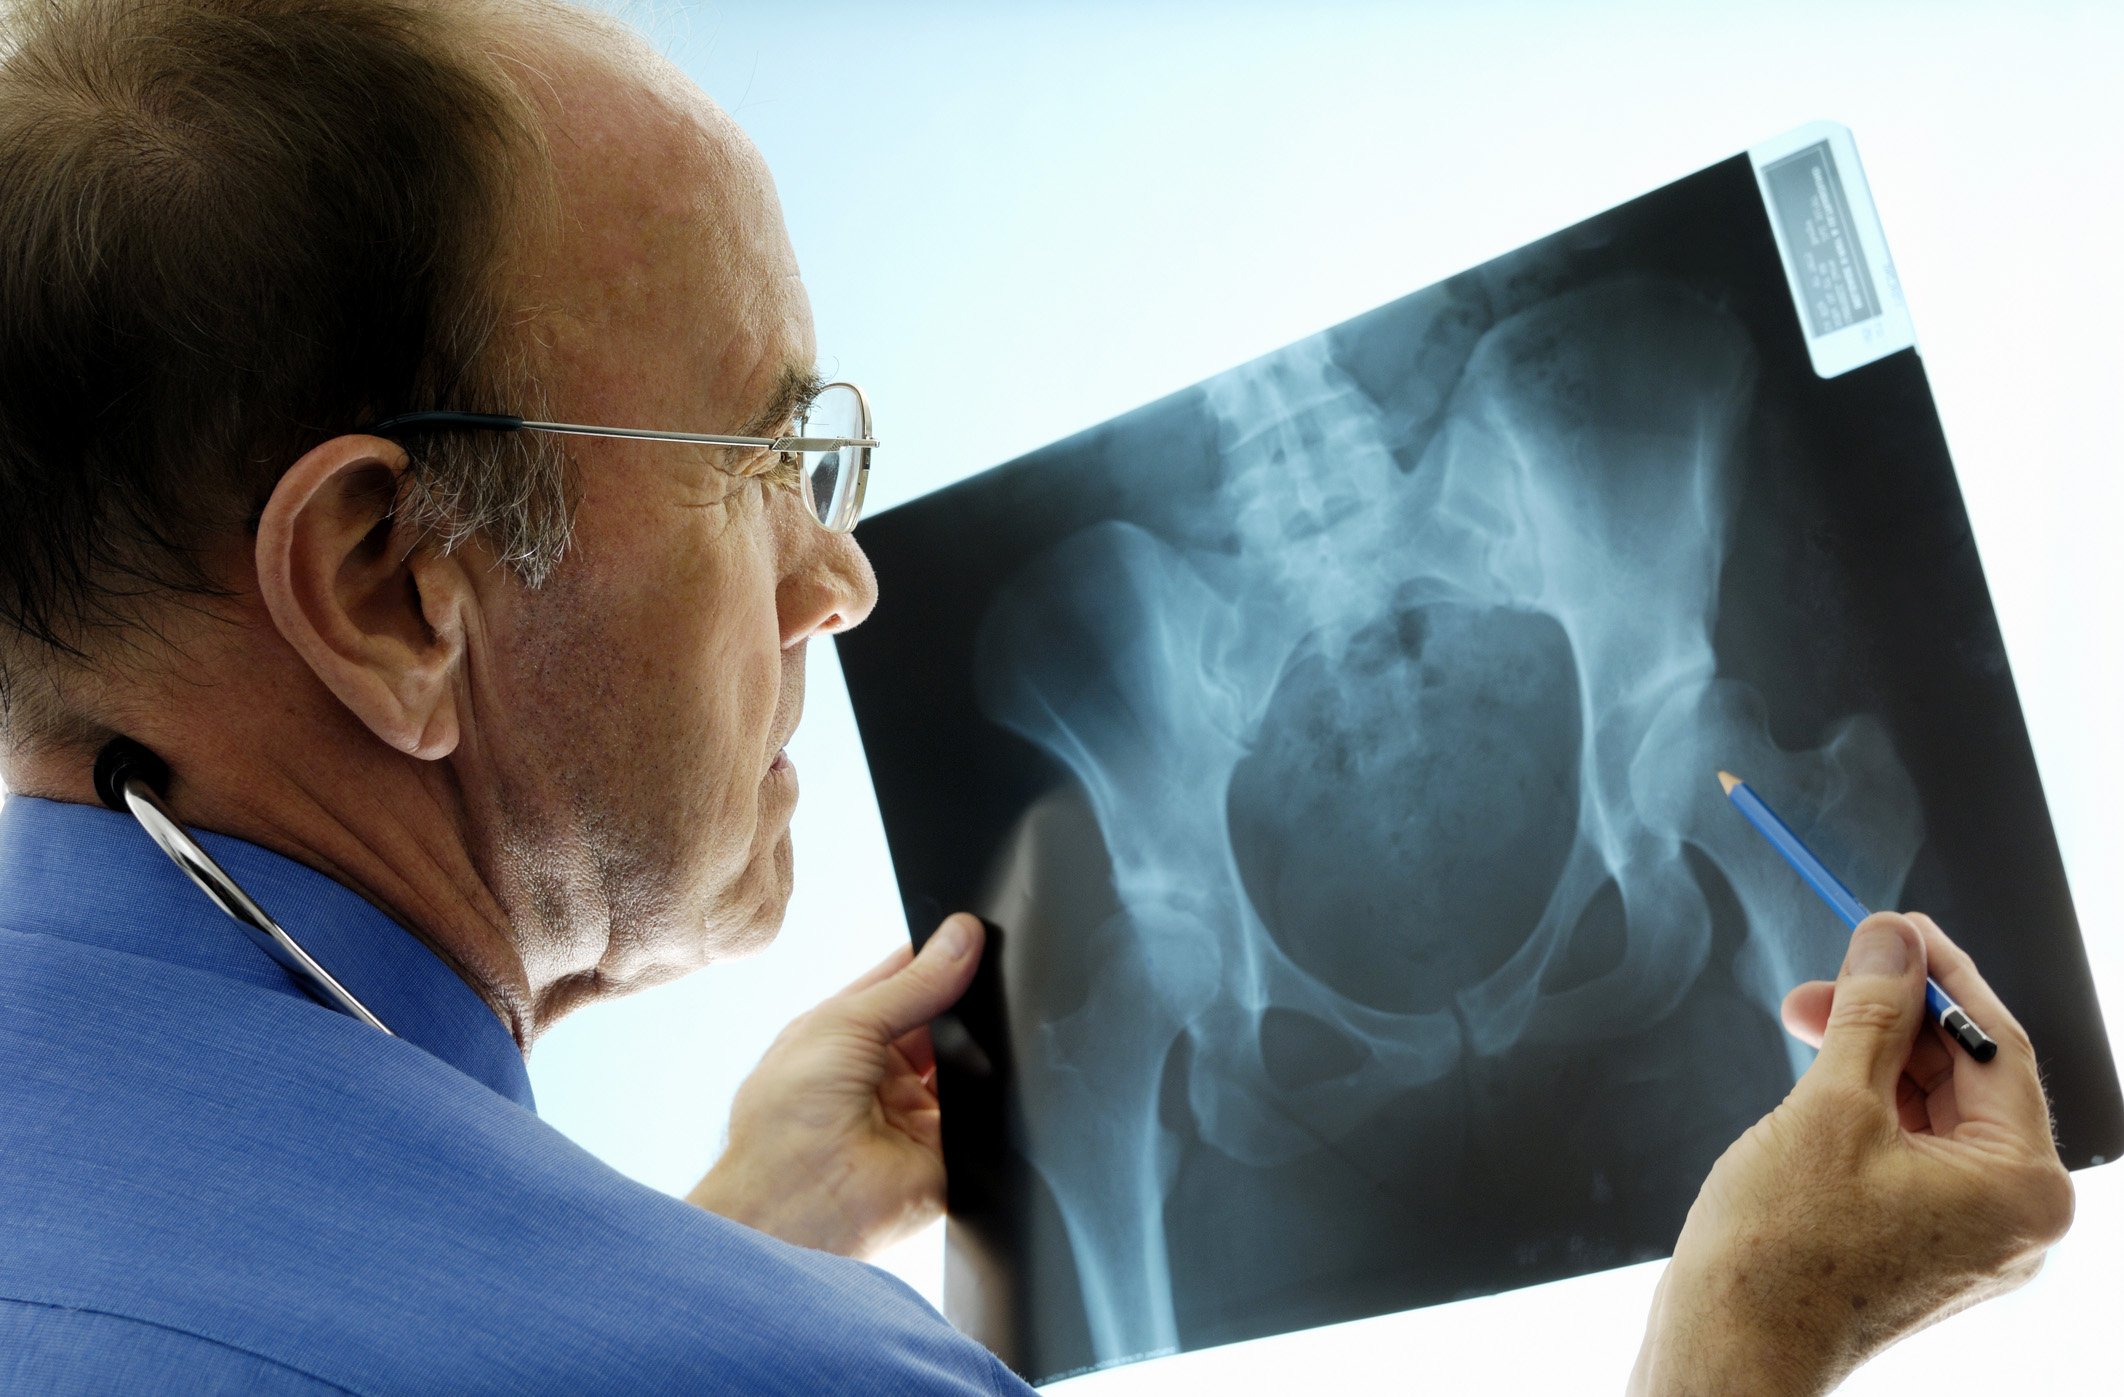 Orthopedic Surgeons: Seven Things You Need to Know